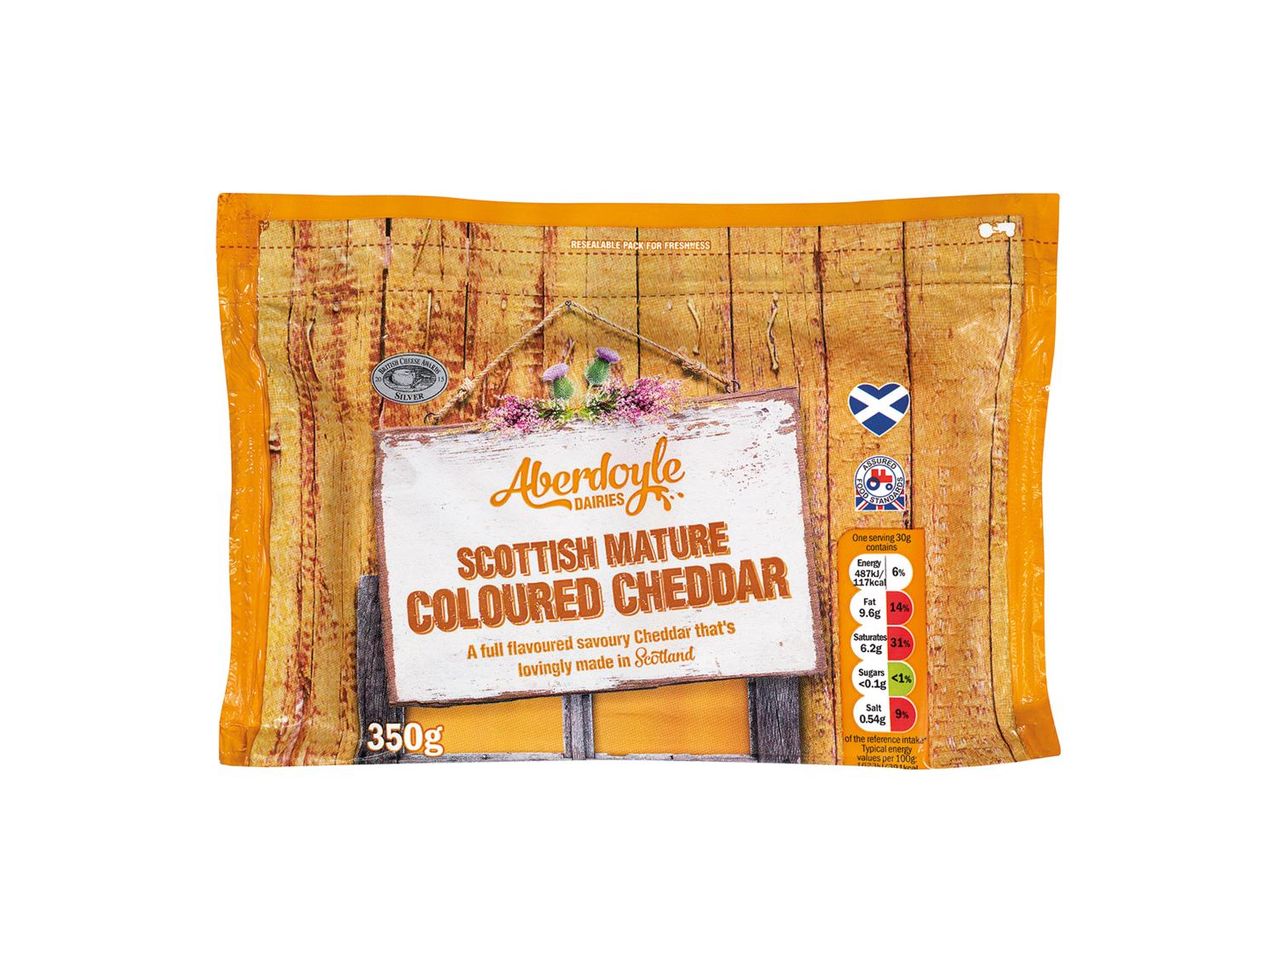 Go to full screen view: Aberdoyle Dairies Scottish Mature Coloured Cheddar - Image 1